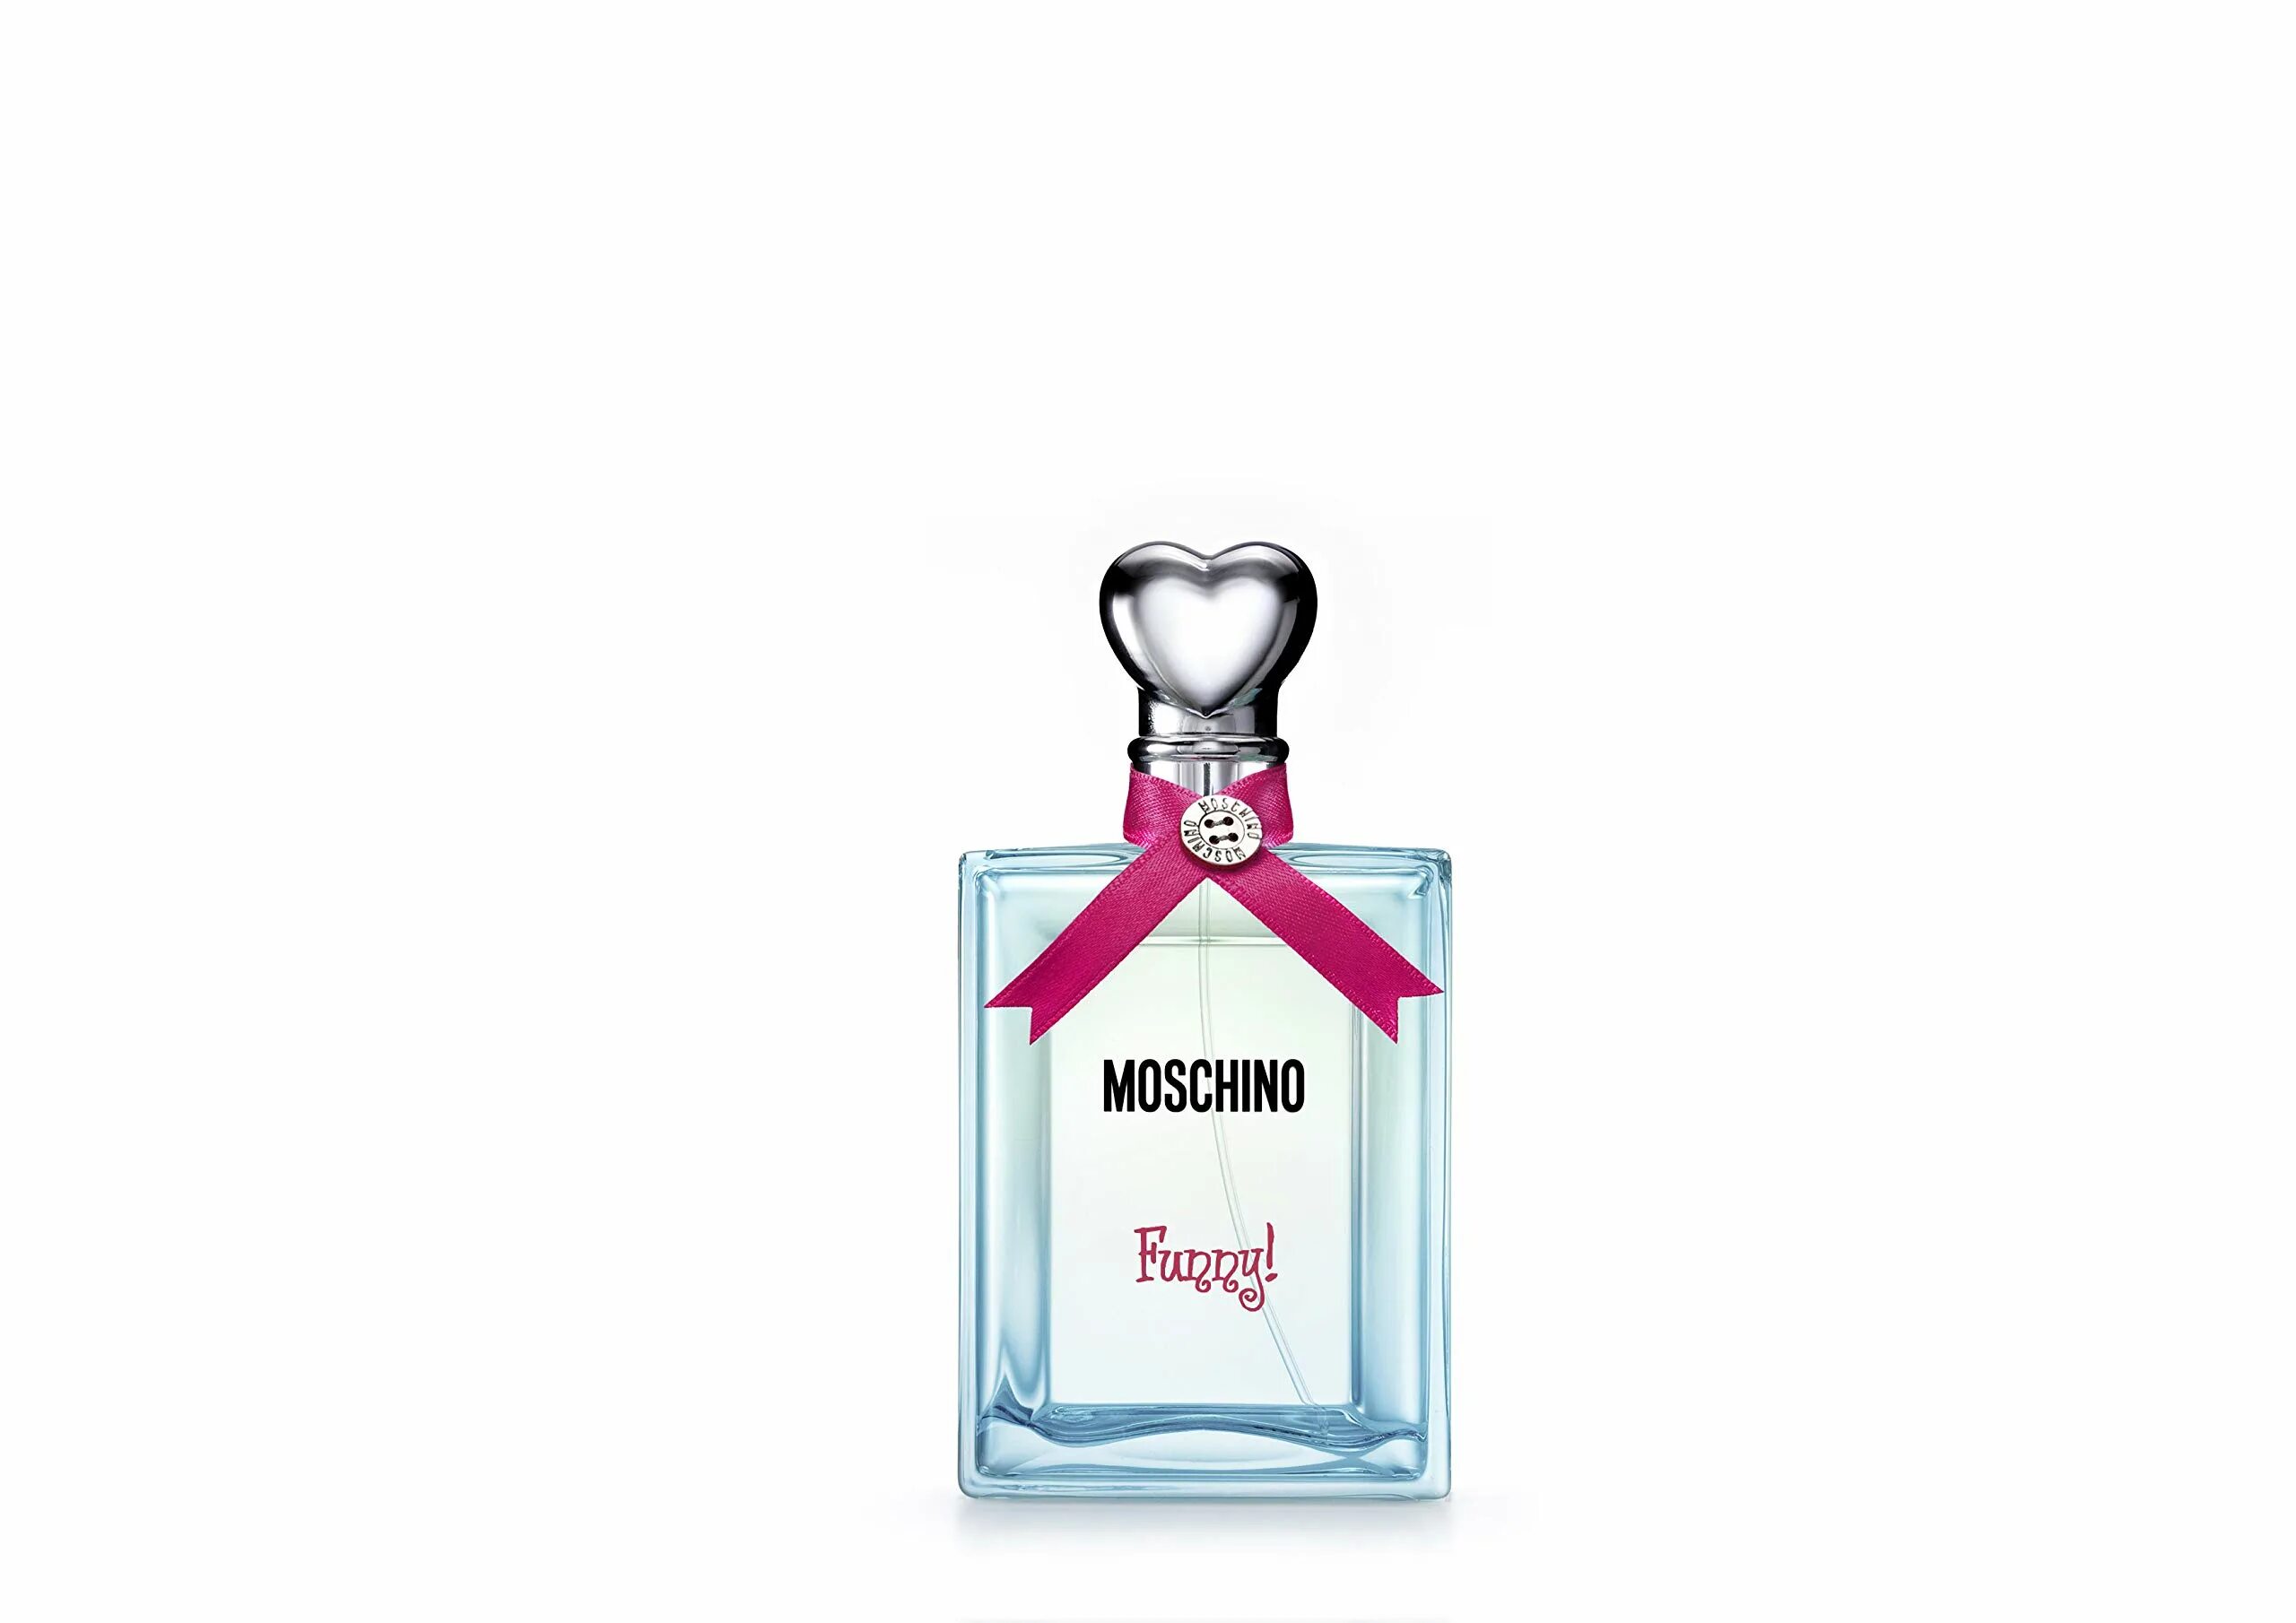 Moschino funny! EDT (100 мл). Moschino funny w EDT 100 ml. Летуаль духи Москино. Moschino funny 100 мл. Москино фанни купить